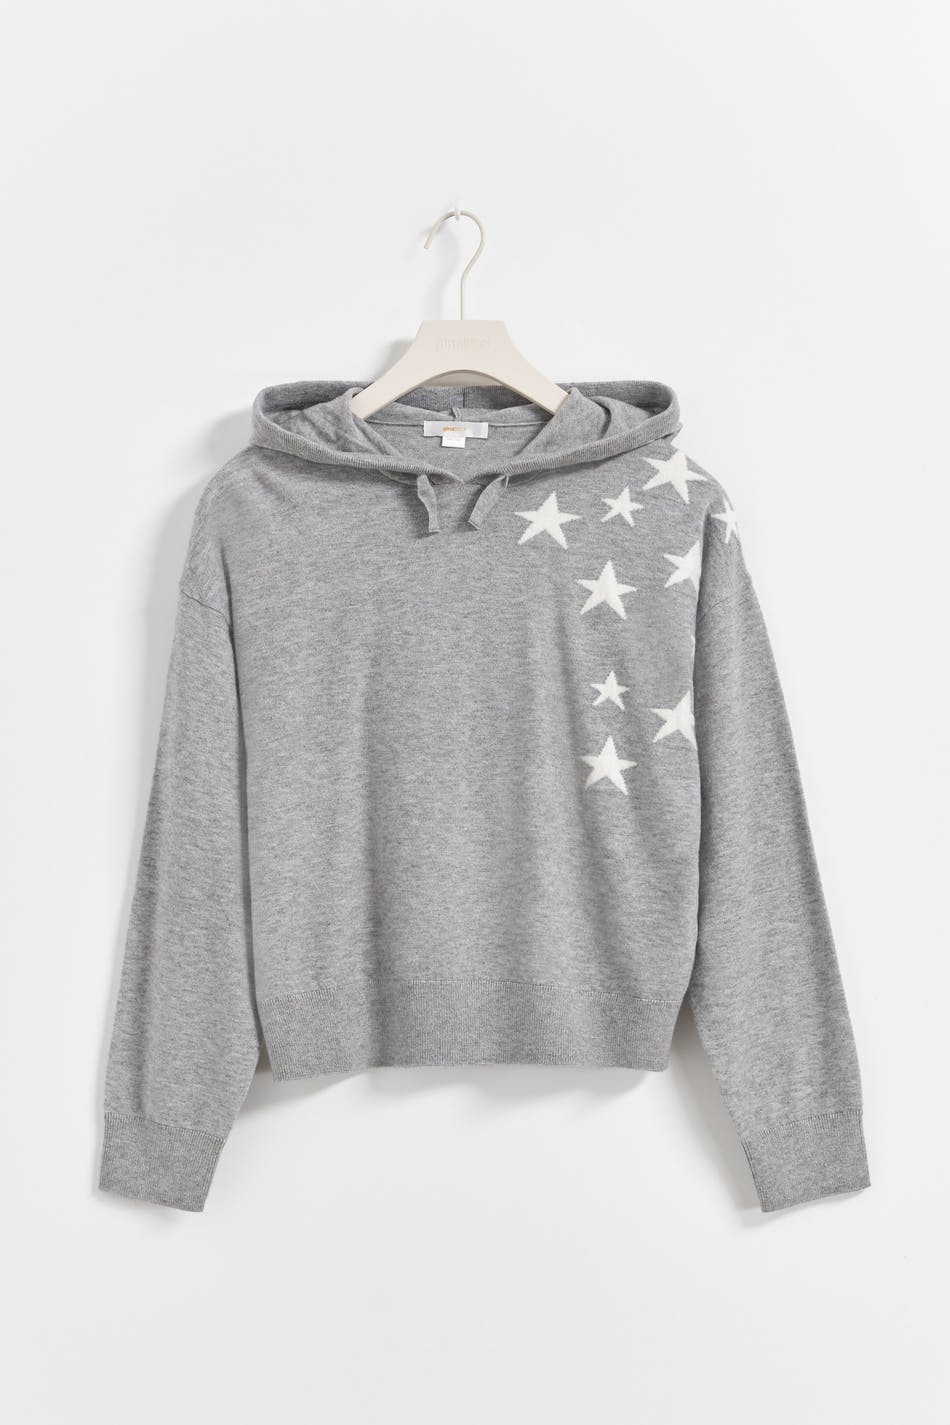 Gina Tricot - Y star knitted hoodie - young-tops - Grey - 146/152 - Female